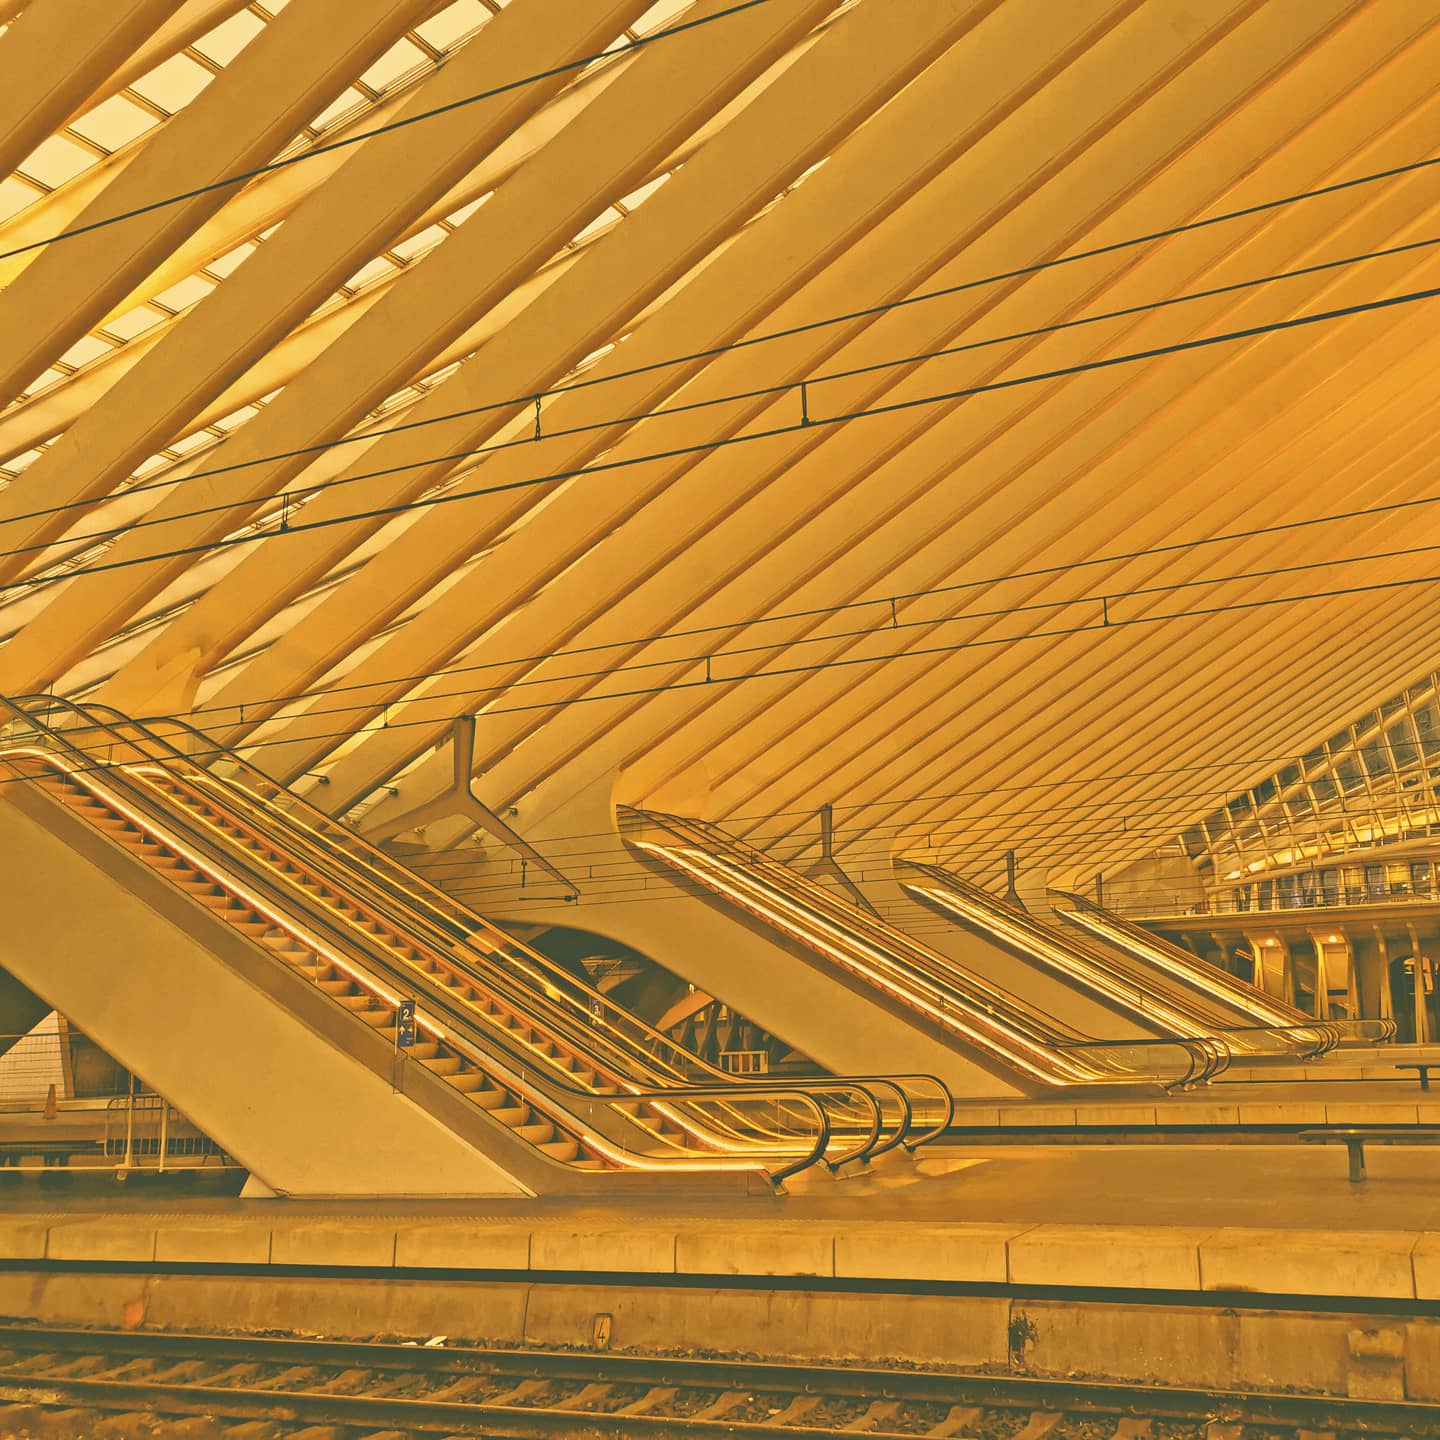 Picture in Liège-Guillemins train station